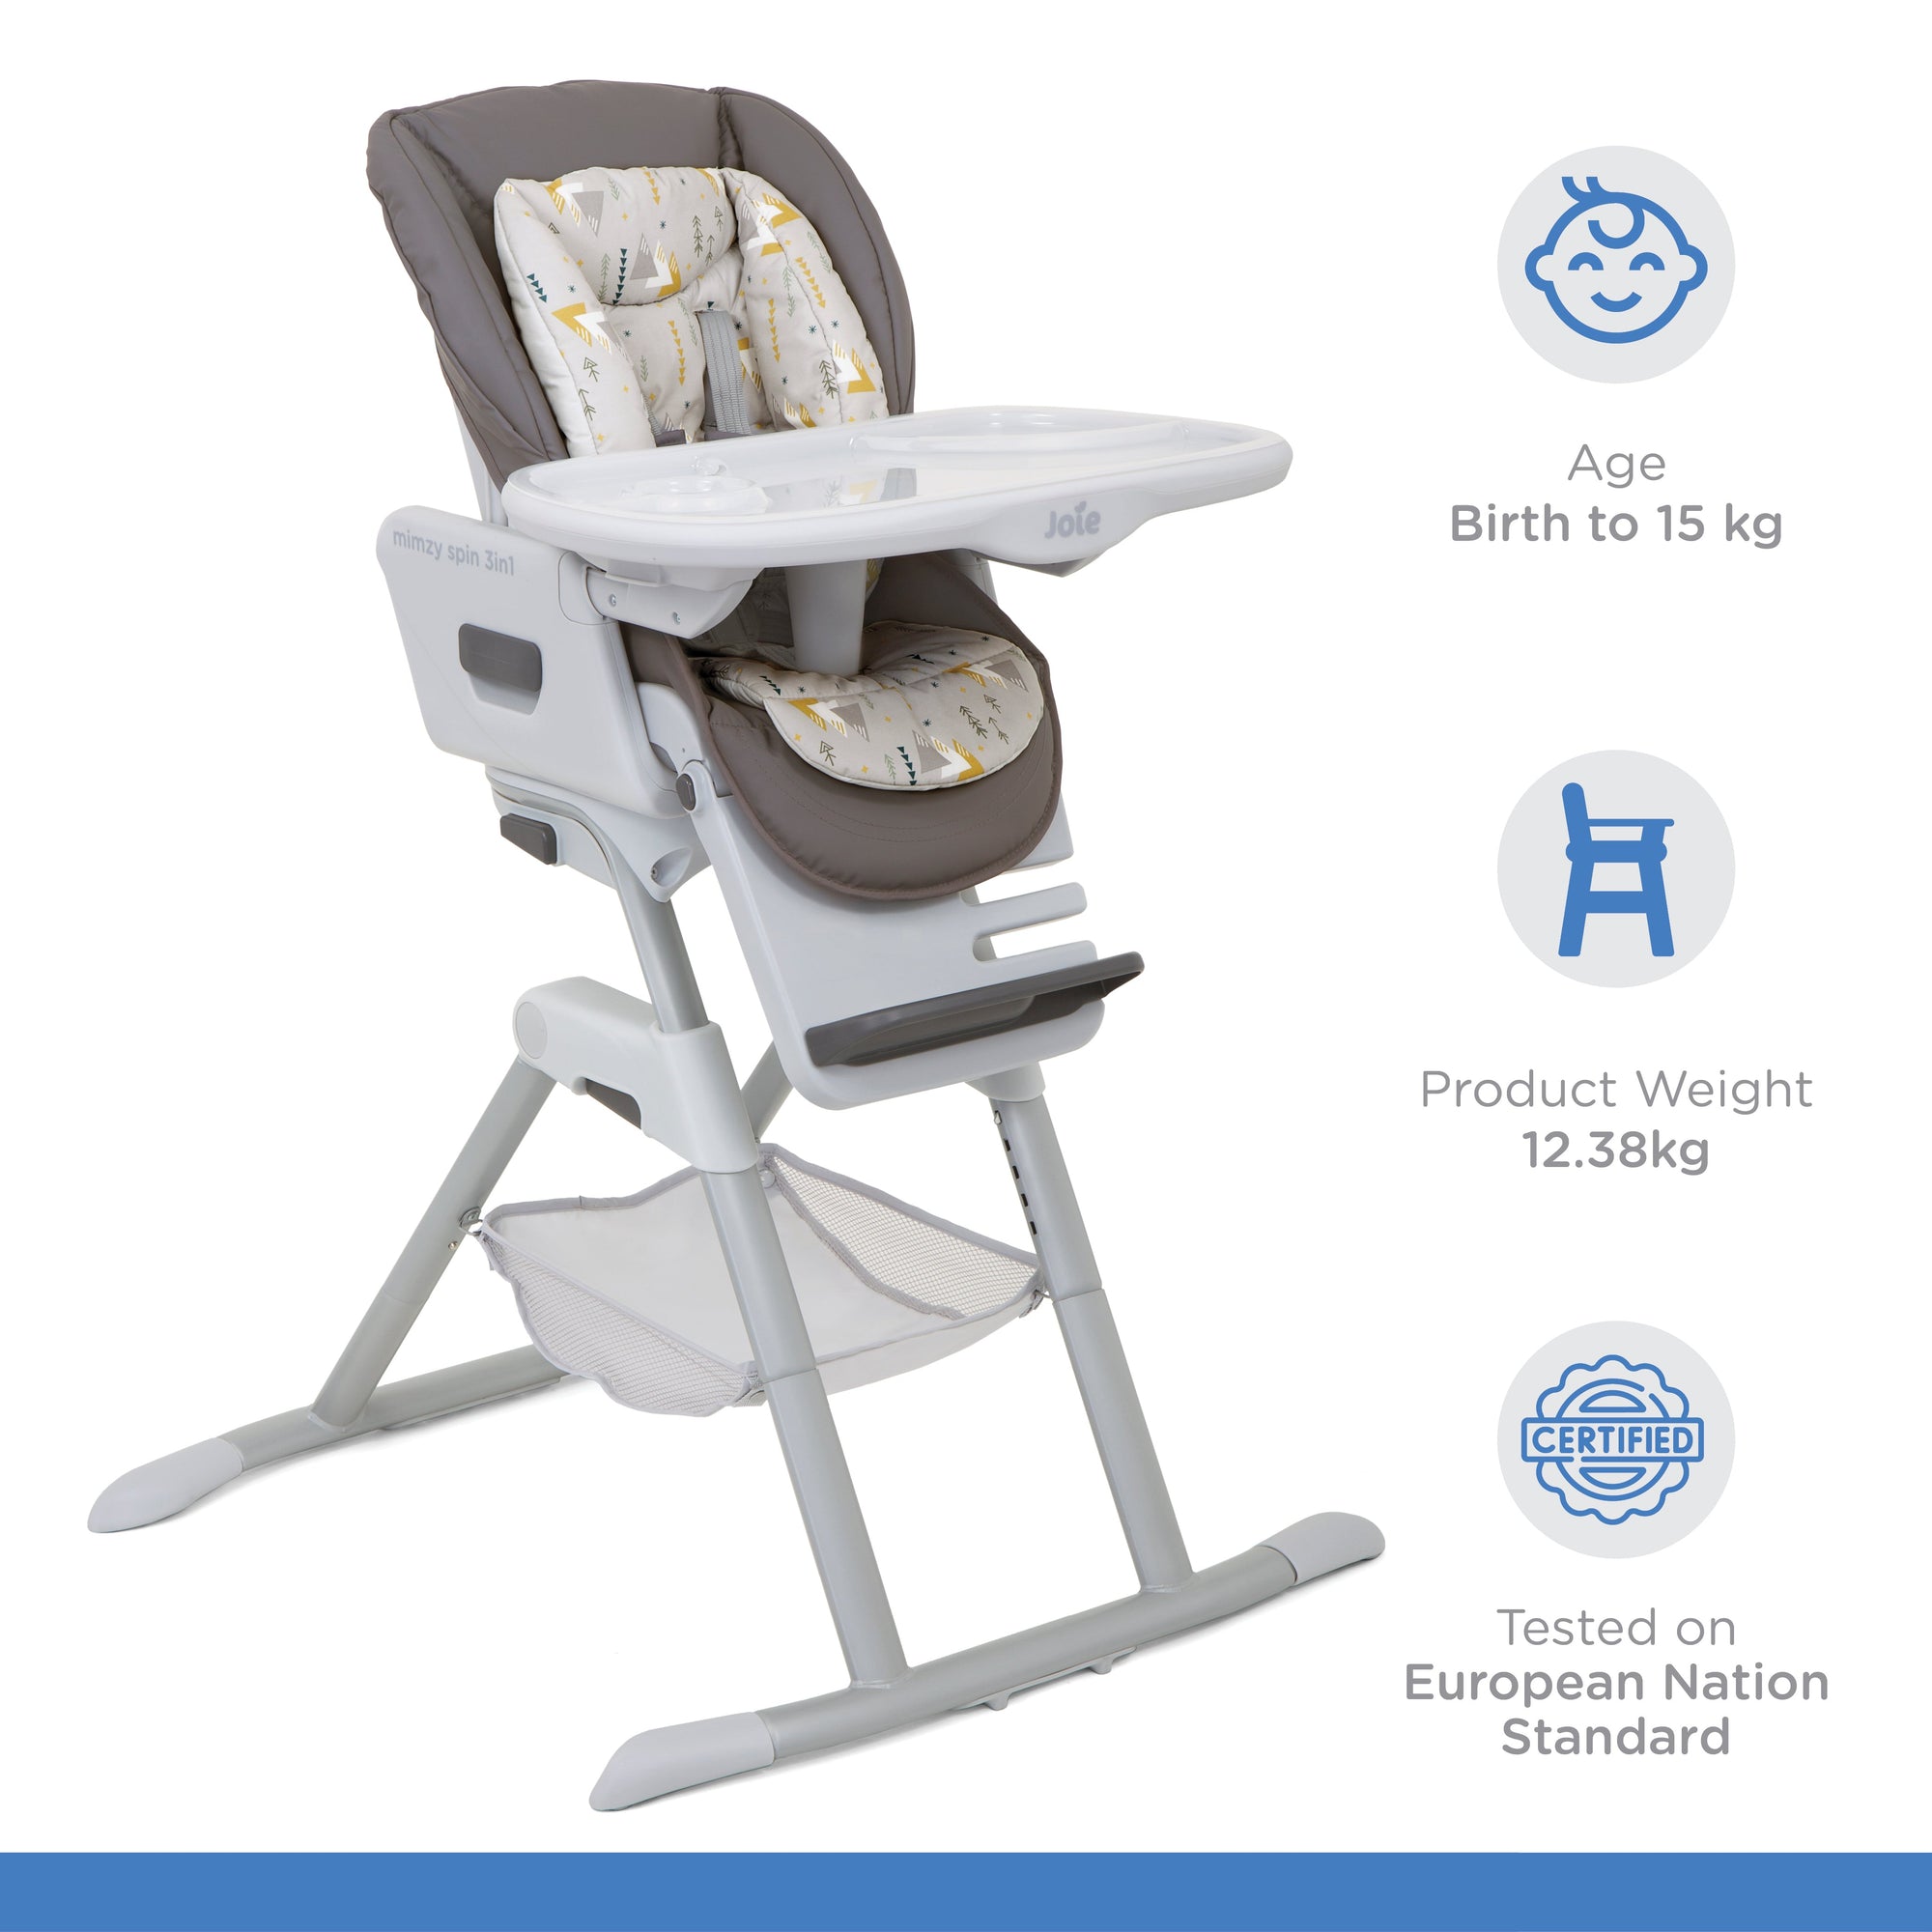 Joie 360° spinning High Chair Mimzy Spin 3in1 High Chair || Fashion-Geometric Mountains || Birth+ to 36months - Toys4All.in